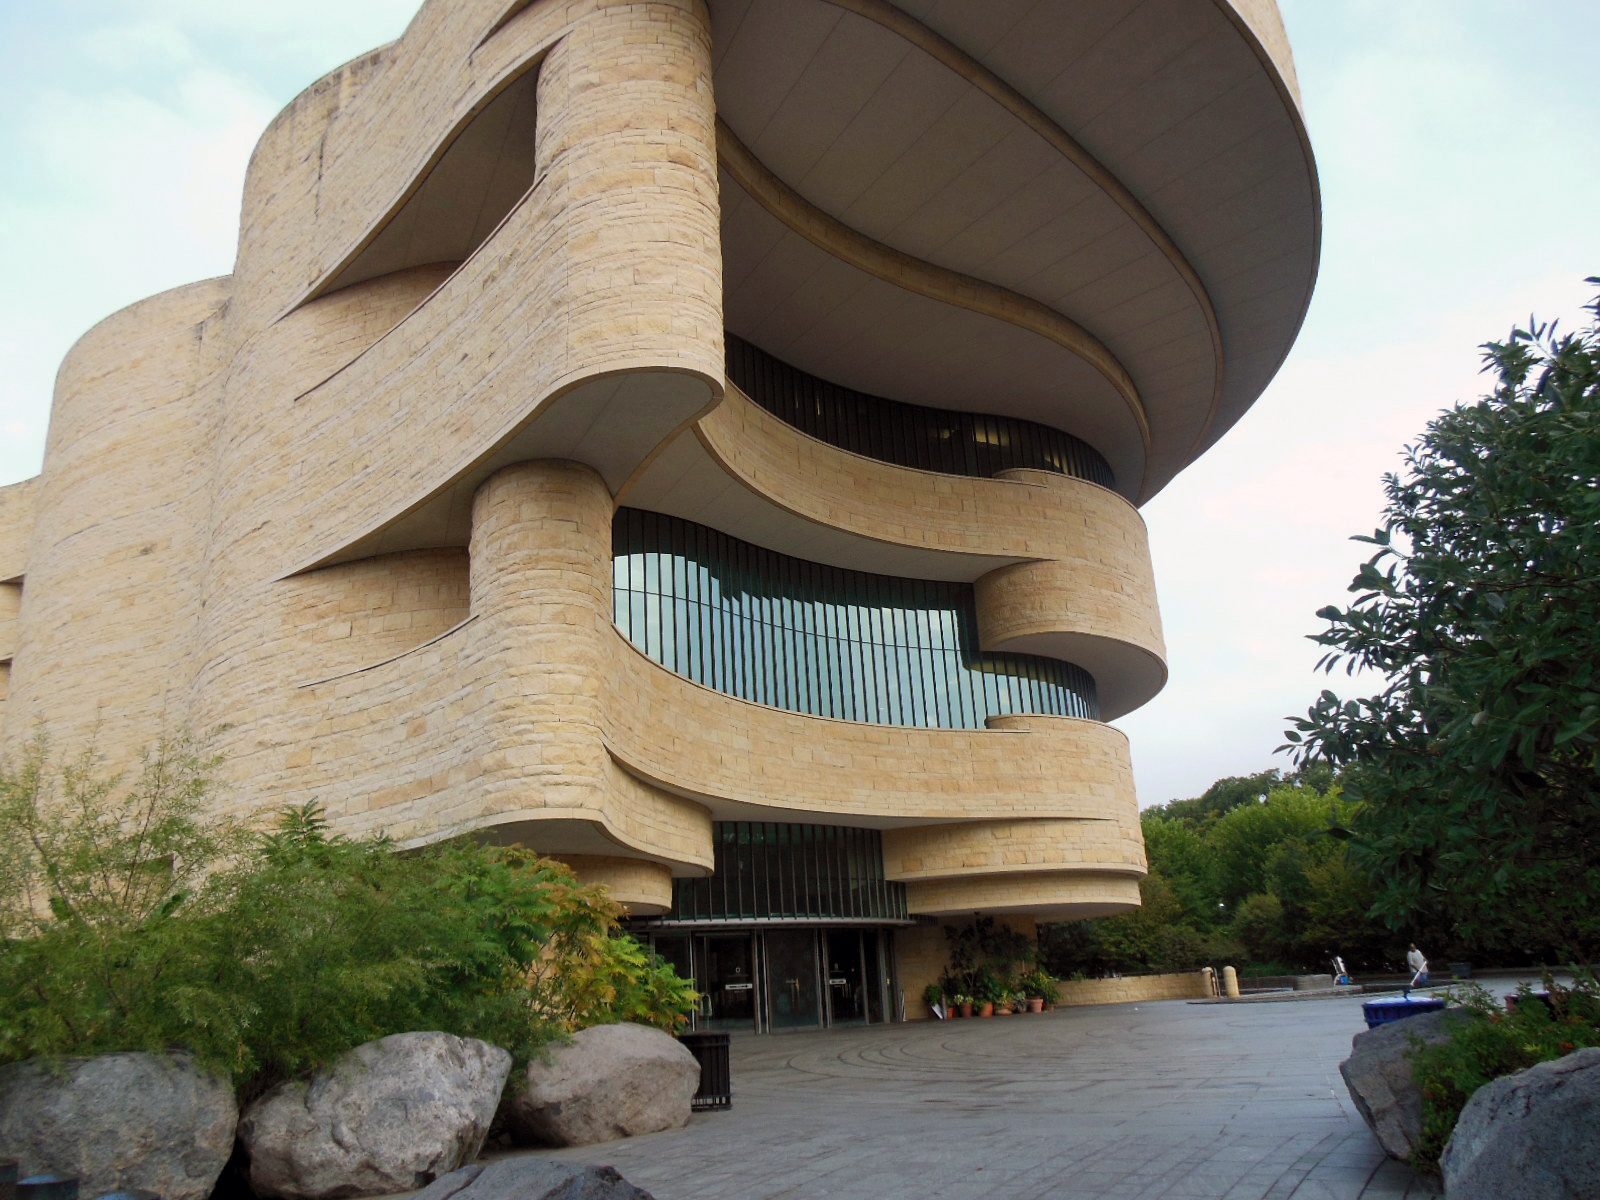 Exterior of National Museum of the American Indian